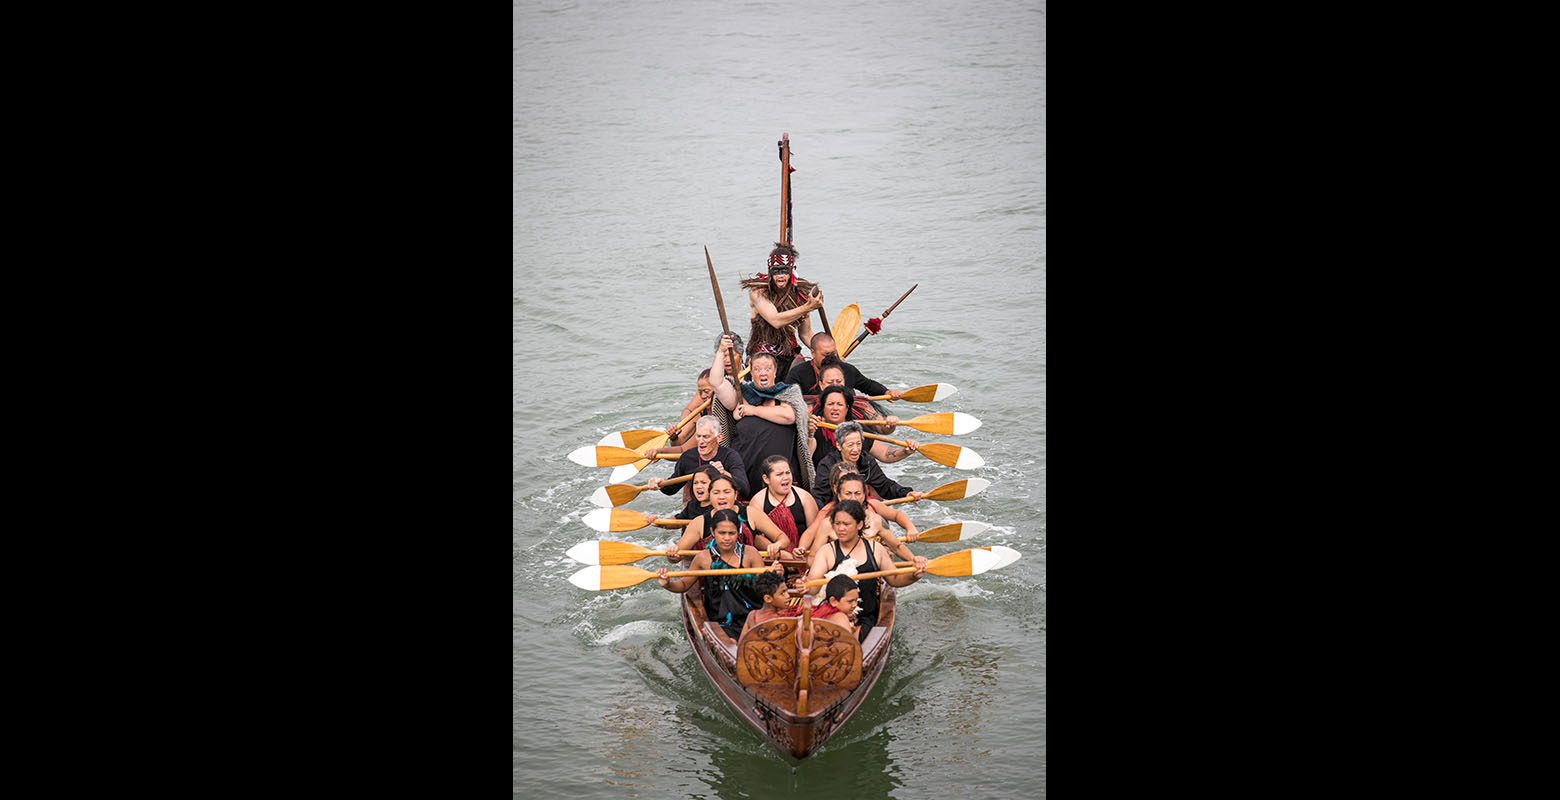 A group of men and women paddling a waka